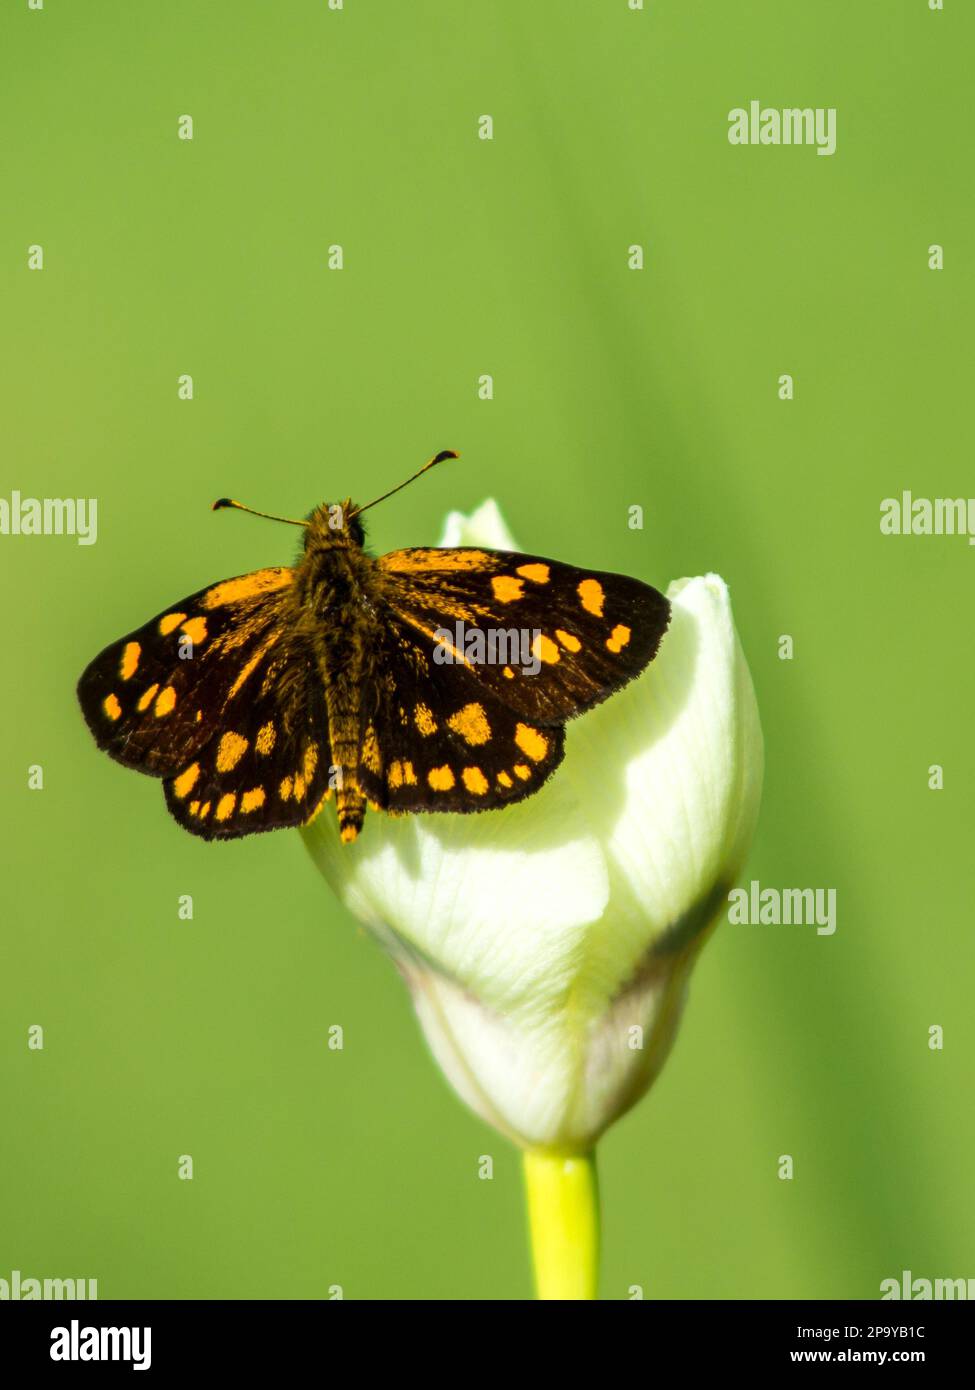 A small butterfly named a Gold-spotted Sylph, Metisella Metis, perched with its wings spread on a delicate white flower bud Stock Photo